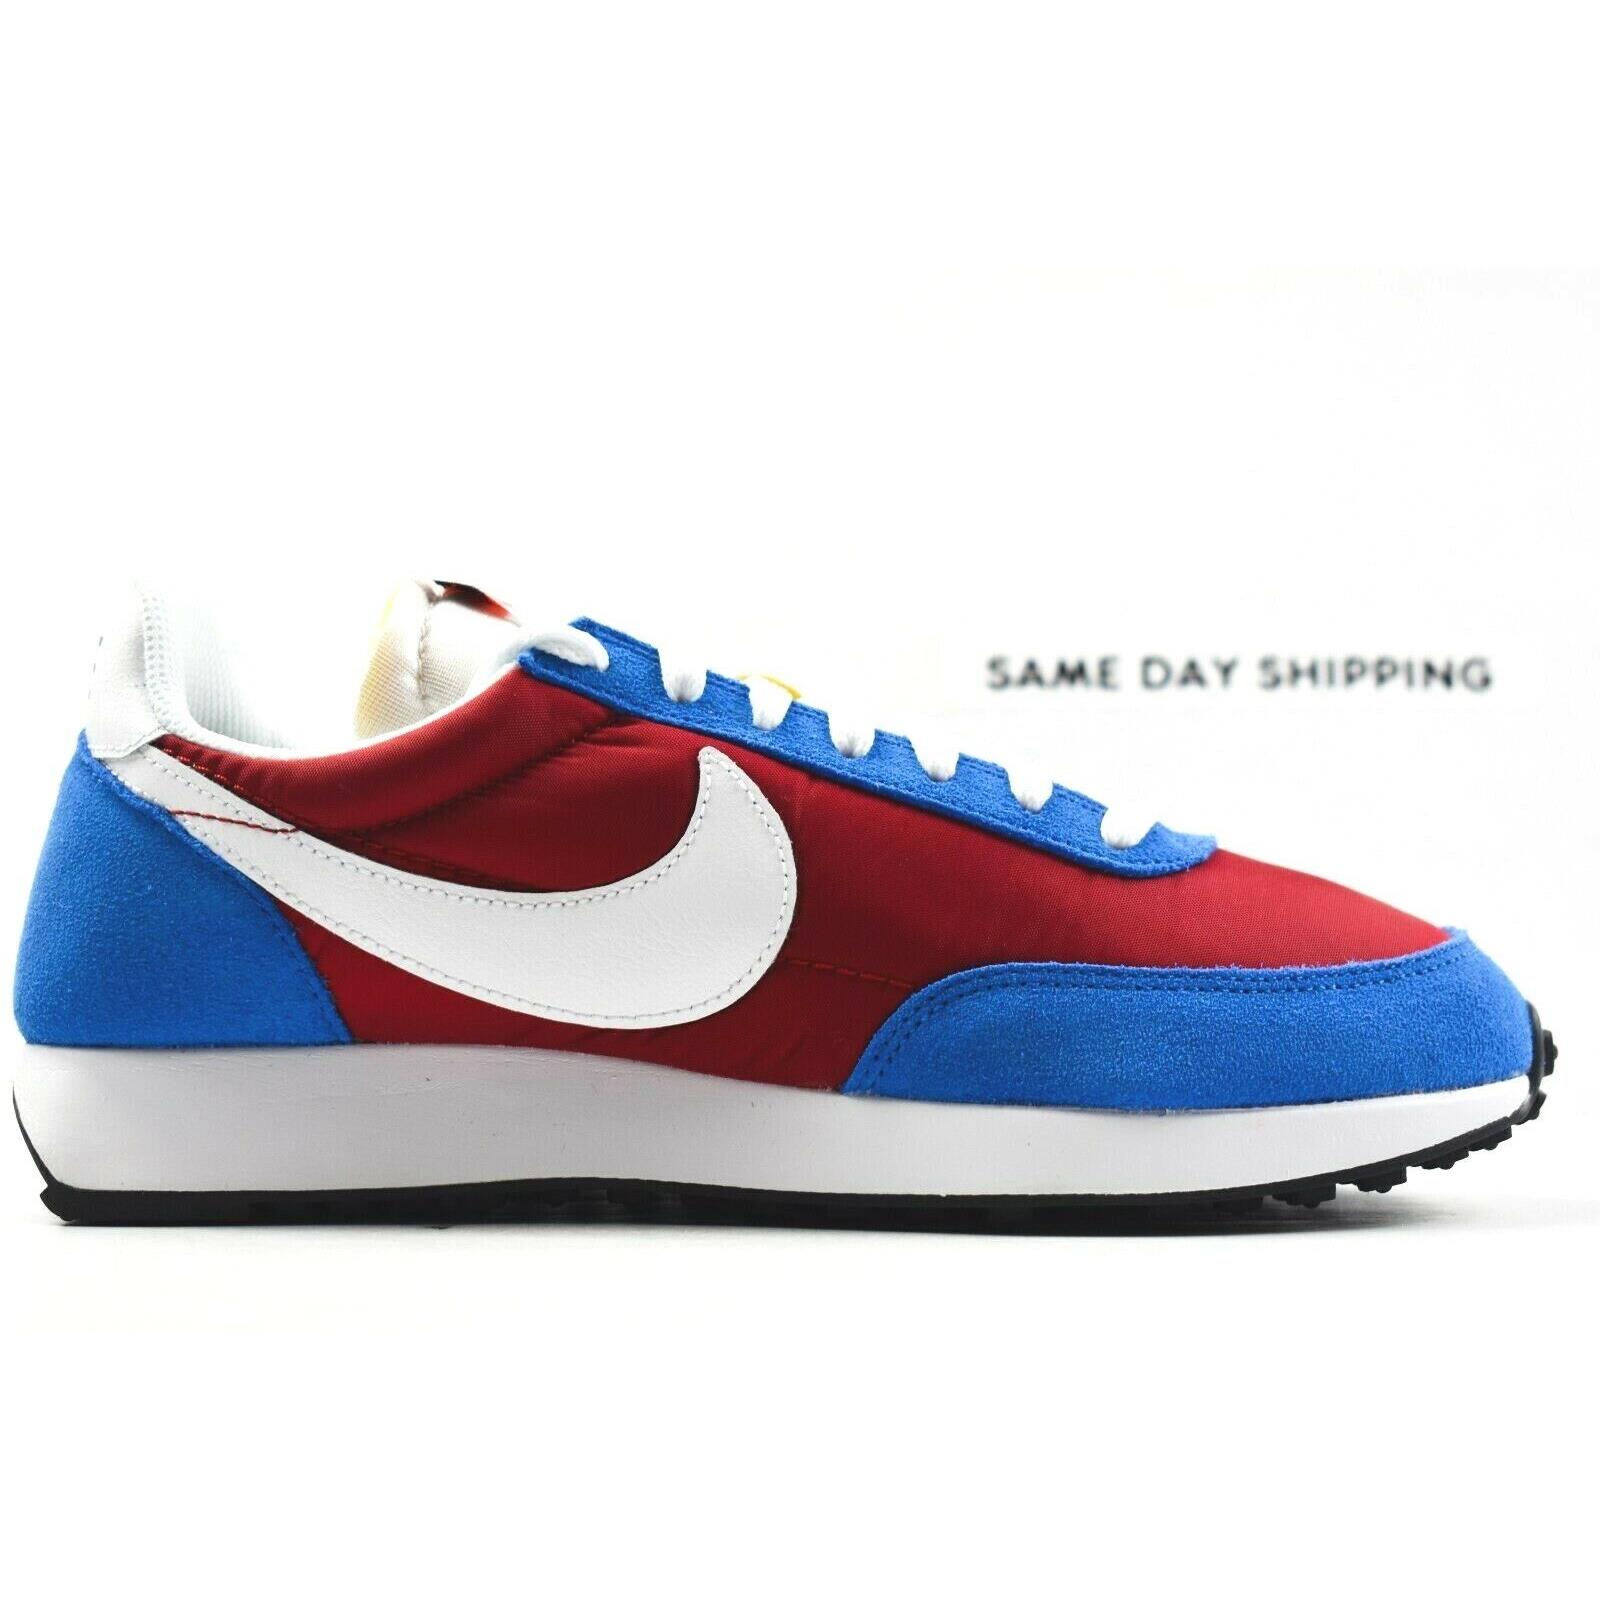 Nike Air Tailwind 79 Mens Size 9.5 Shoes 487754 409 Battle Blue White Gym Red